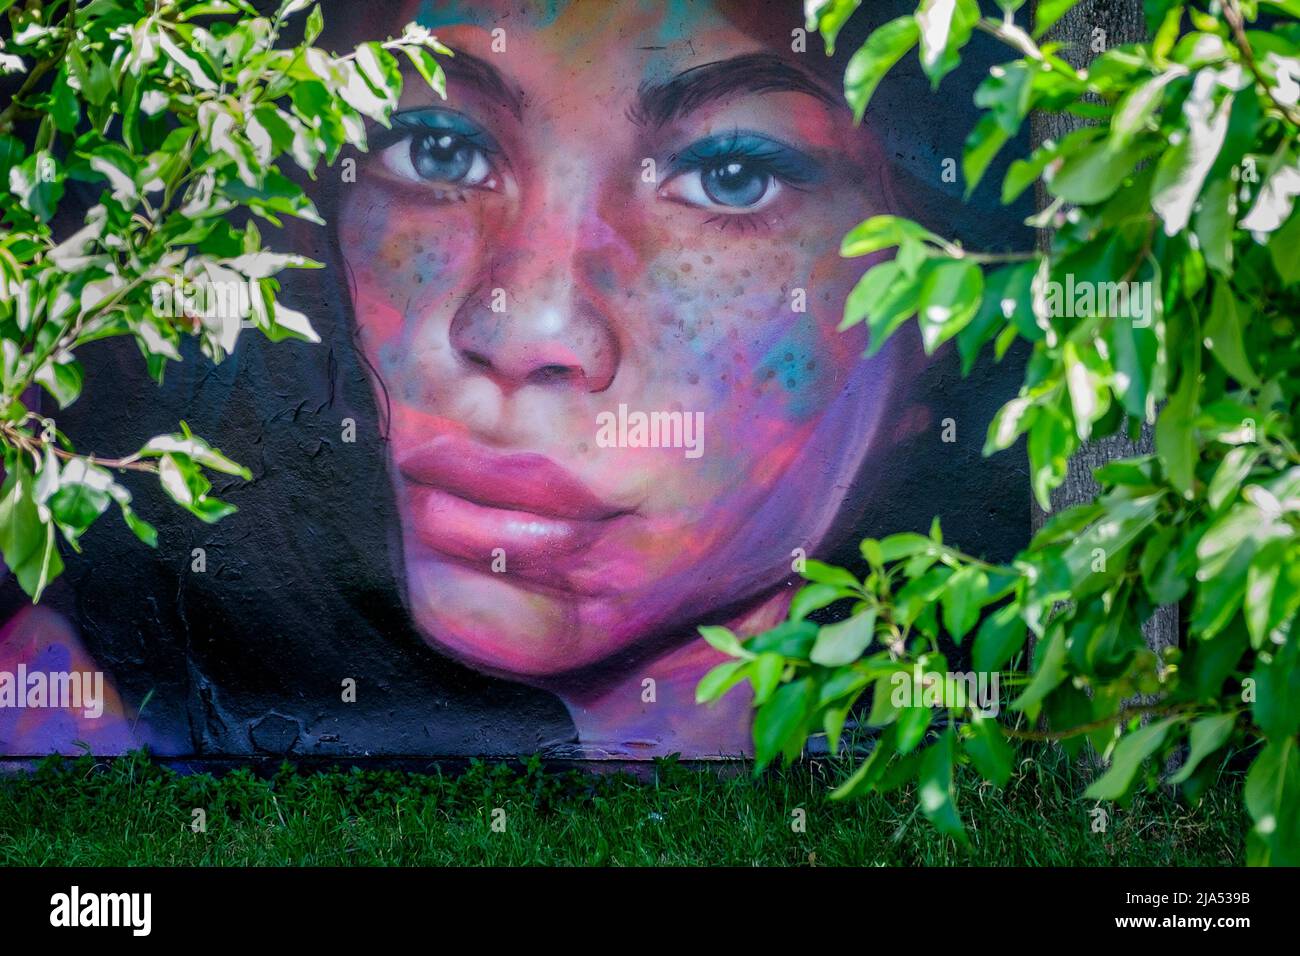 Bristol, UK. 27th May, 2022. Artwork created by American artist SakeOne for the Upfest 2022 festival,Europe's largest Street Art & Graffiti festival is pictured on the streets Bedminster, Bristol. Credit: Lynchpics/Alamy Live News Stock Photo